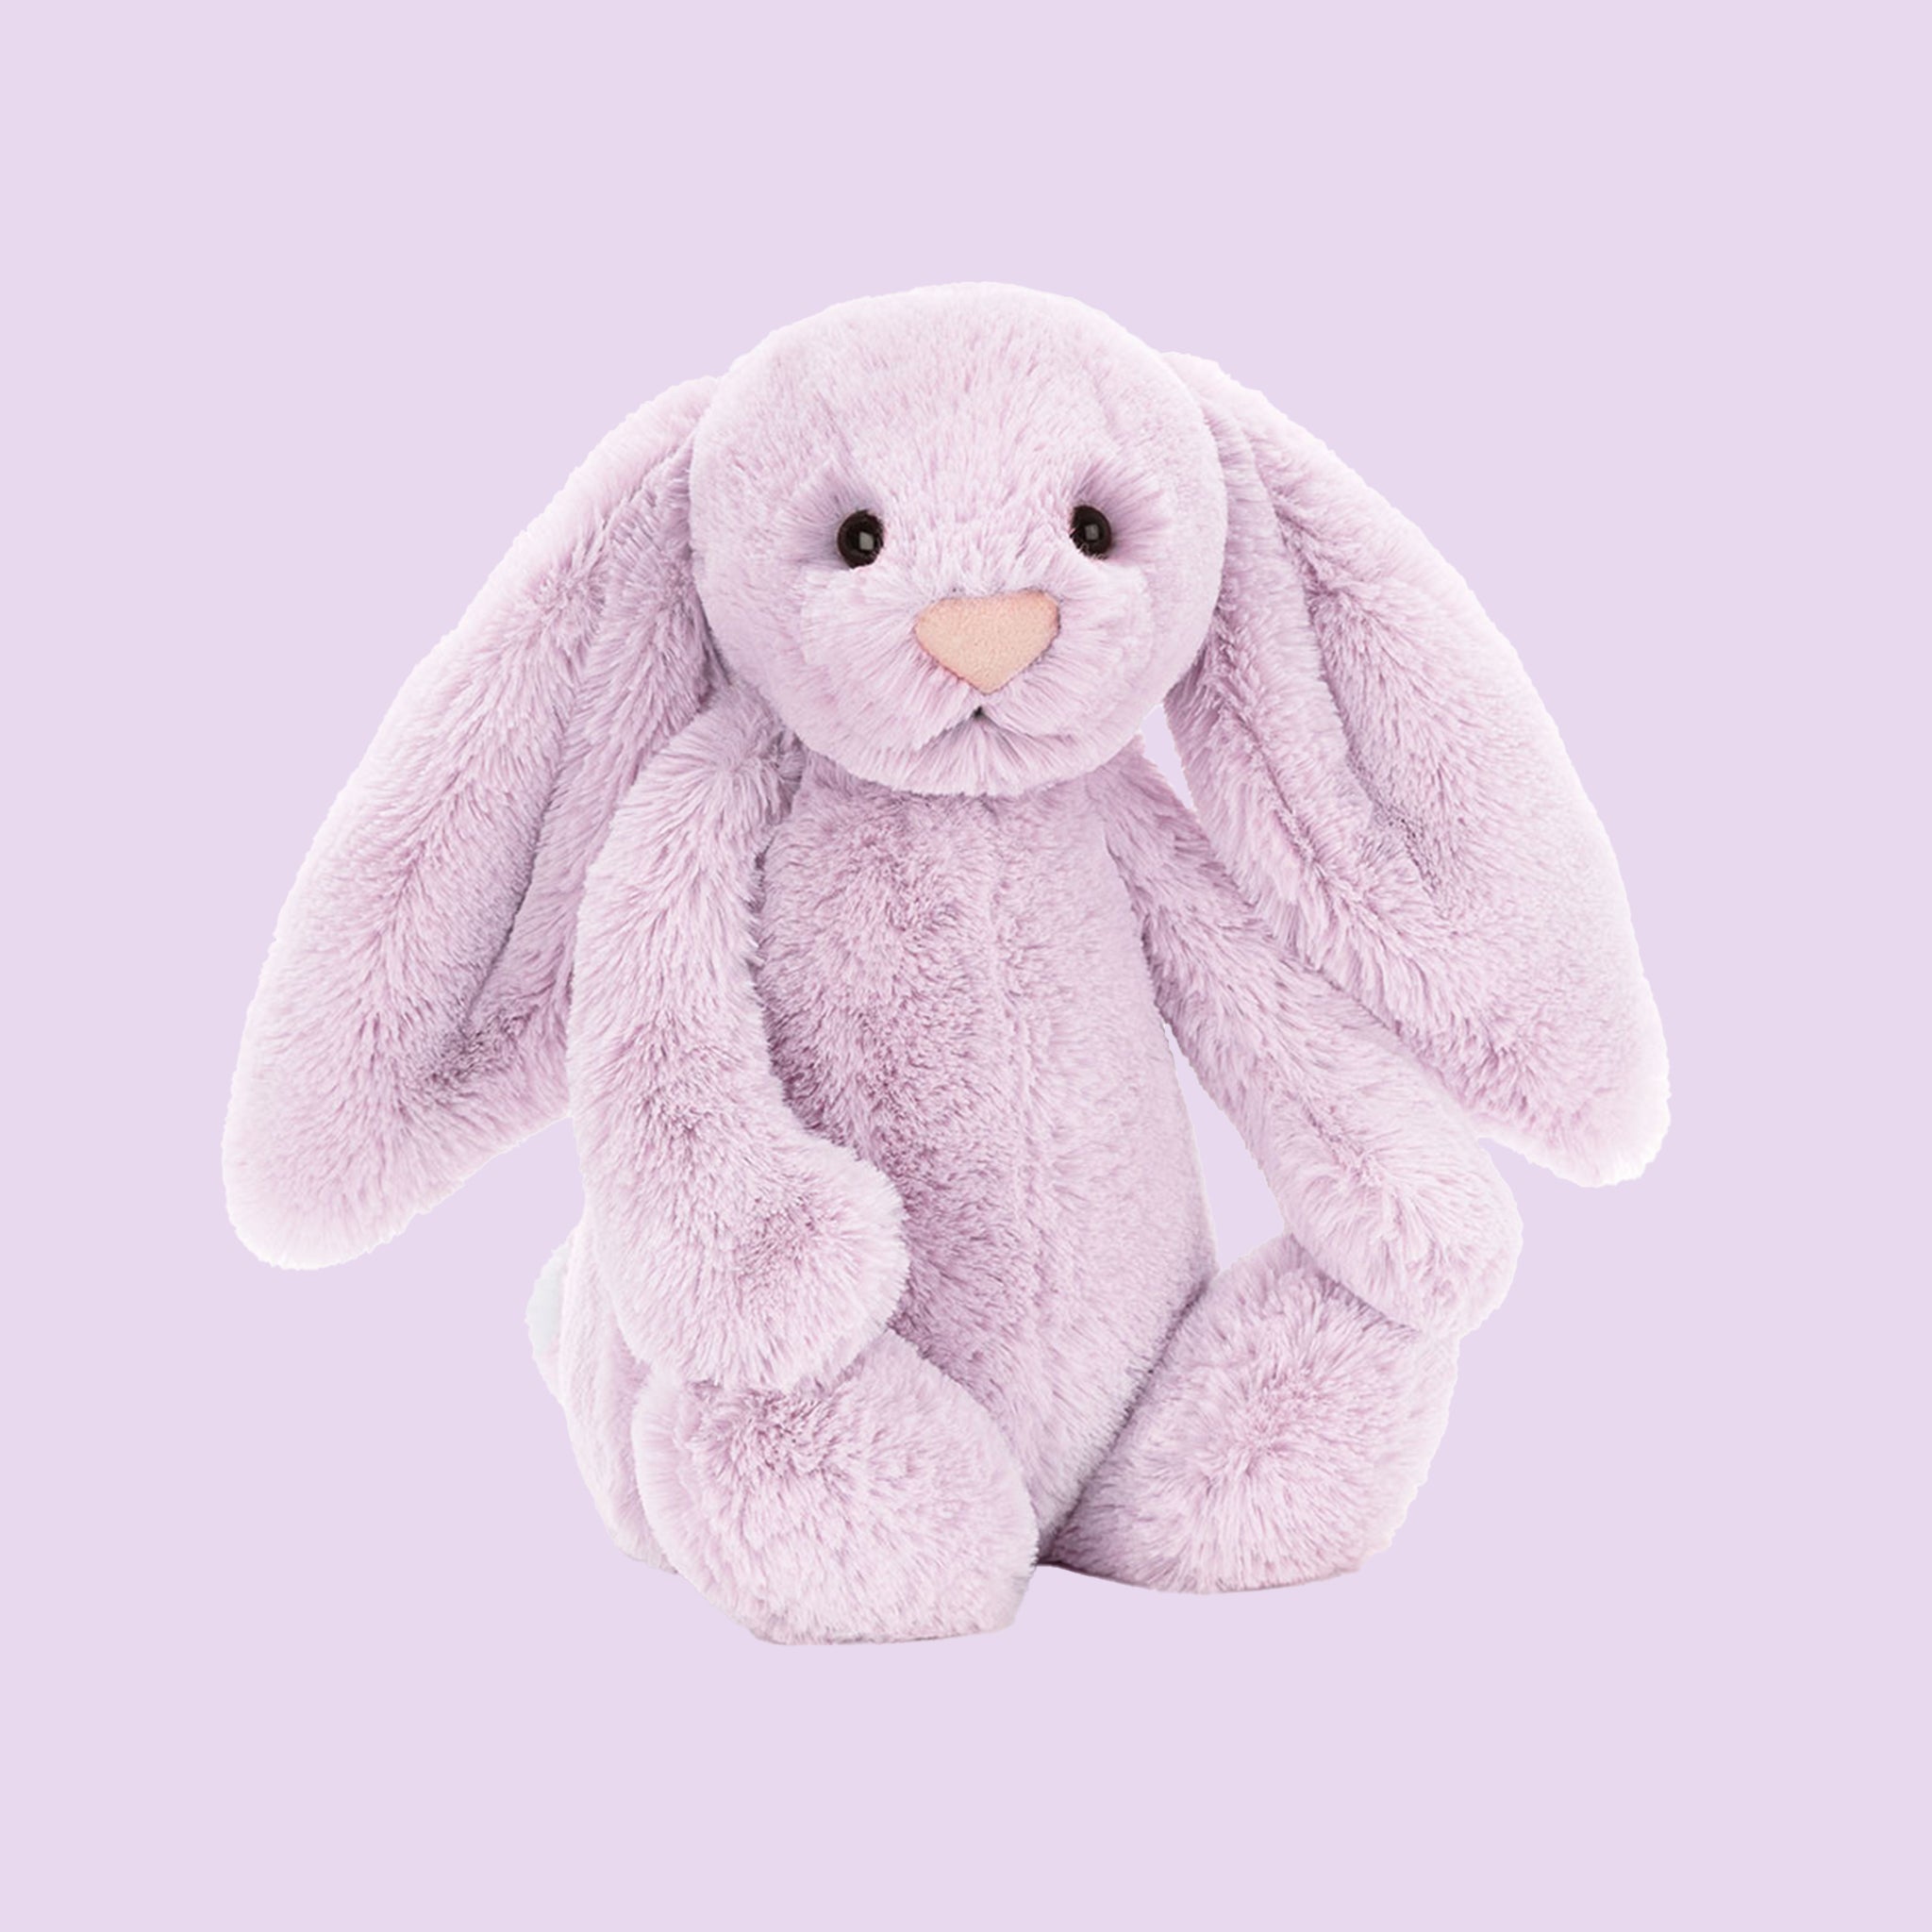 A lilac colored bunny stuffed animal toy.